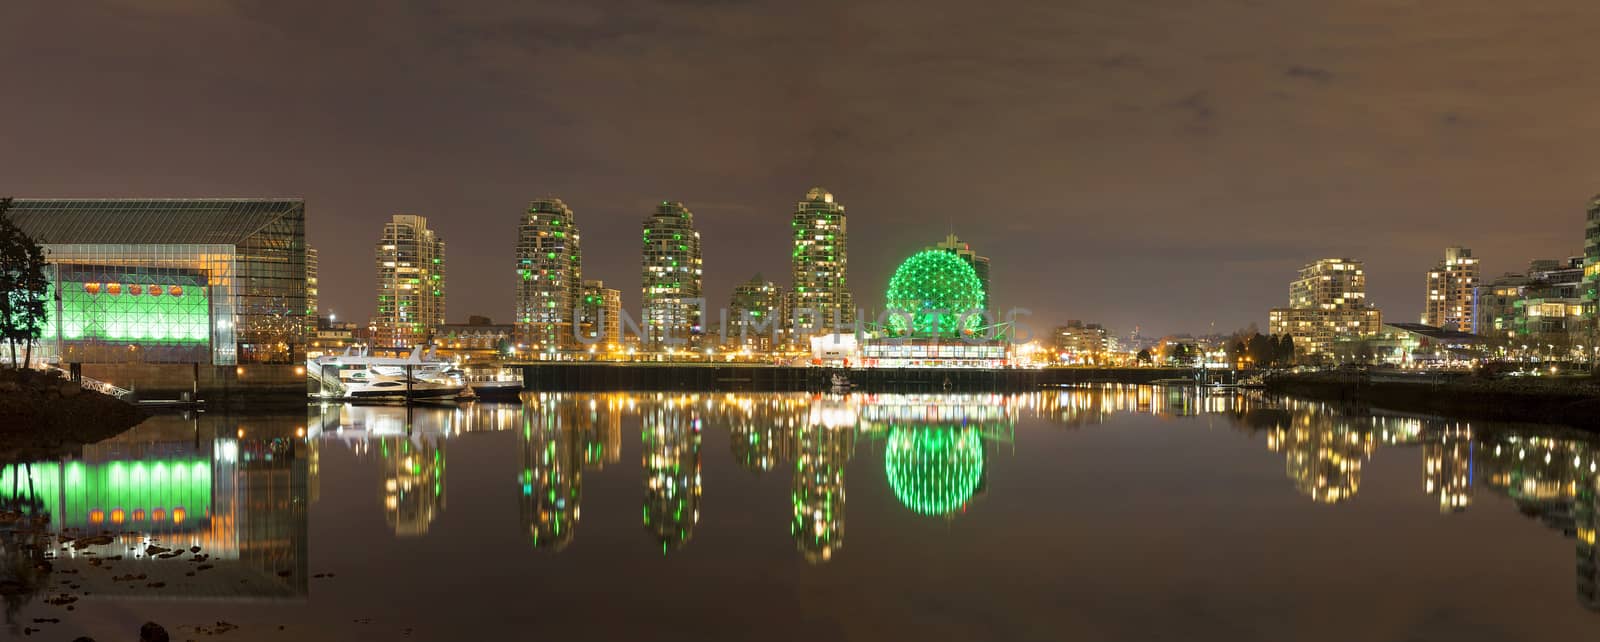 Vancouver BC Cityscape by False Creek at Night by jpldesigns